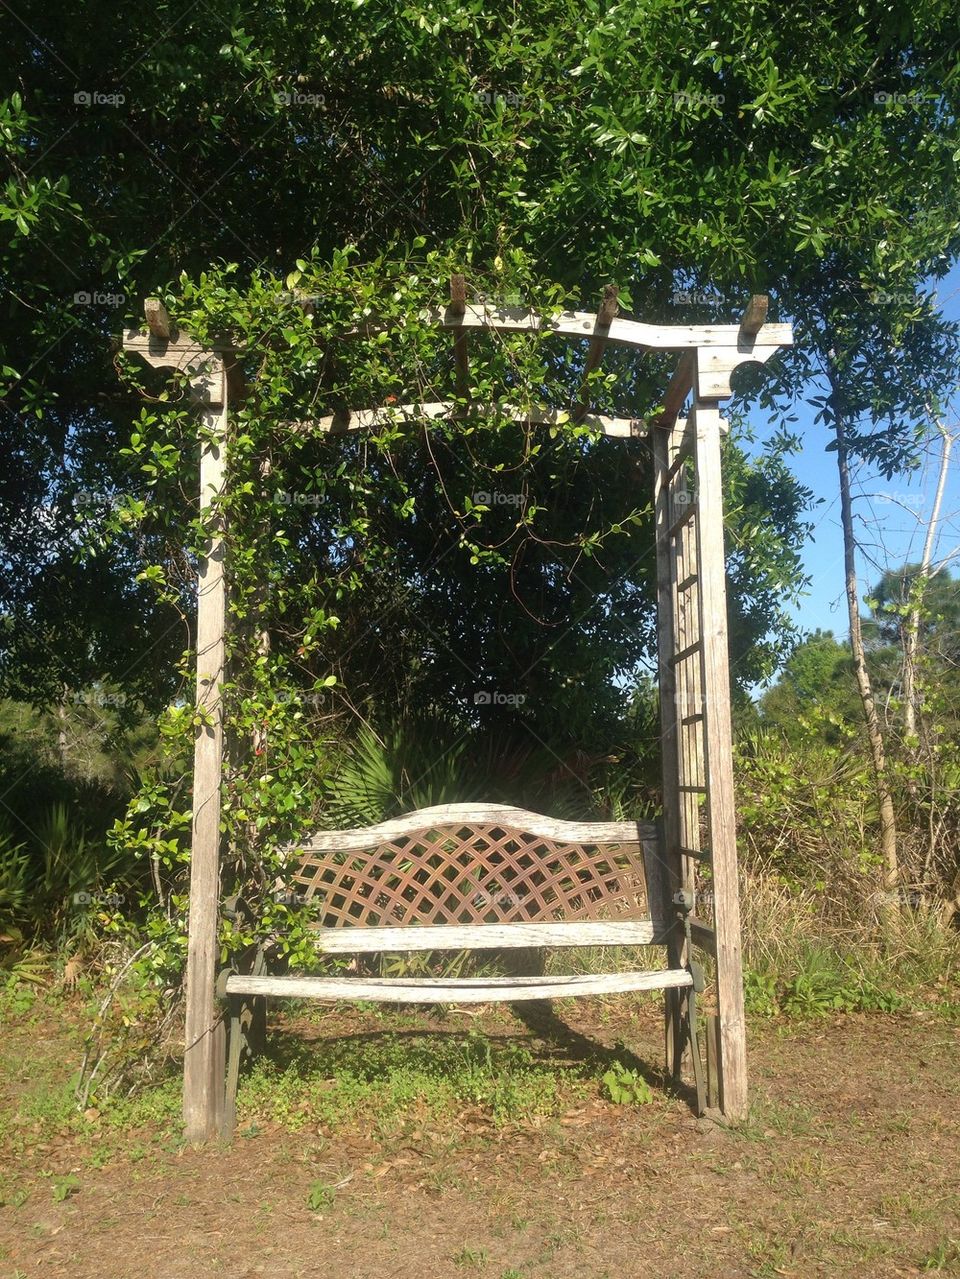 Rustic bench with trellis